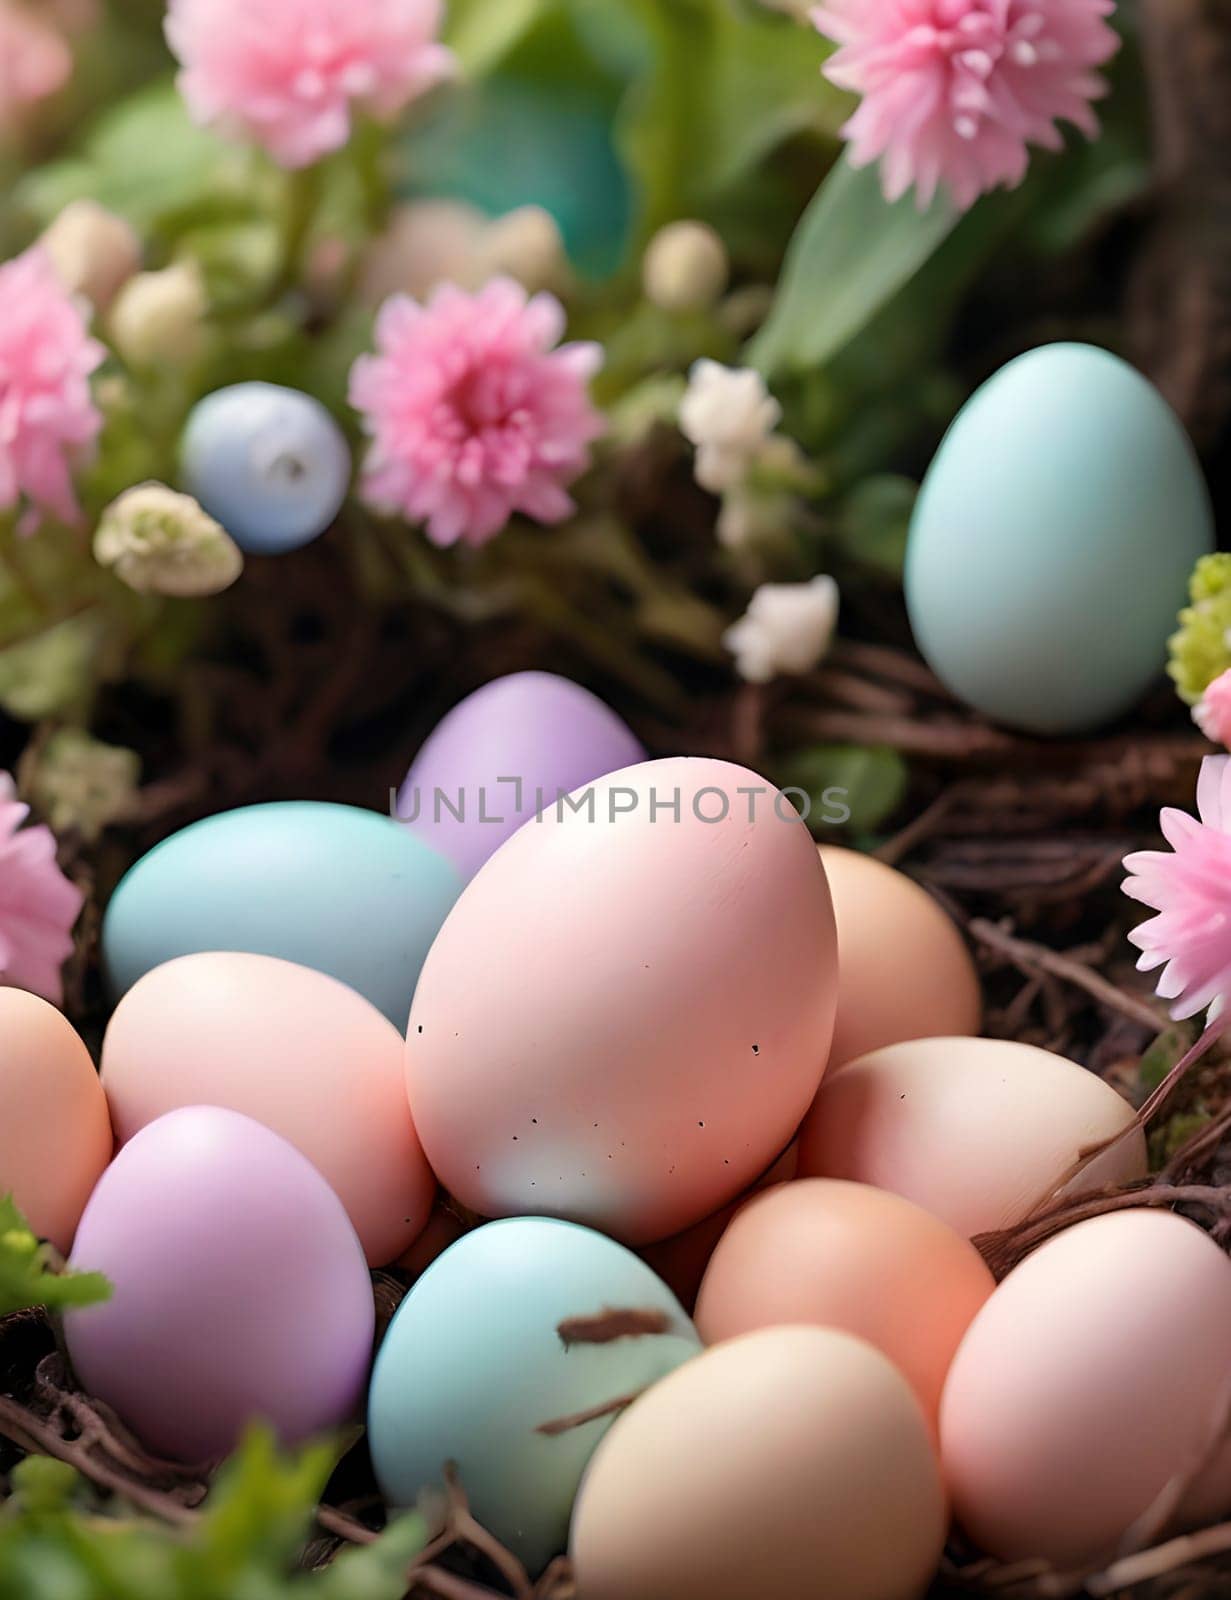 A vibrant Easter egg hunt in a lush, blooming garden with pastel-colored eggs hidden among the flowers.